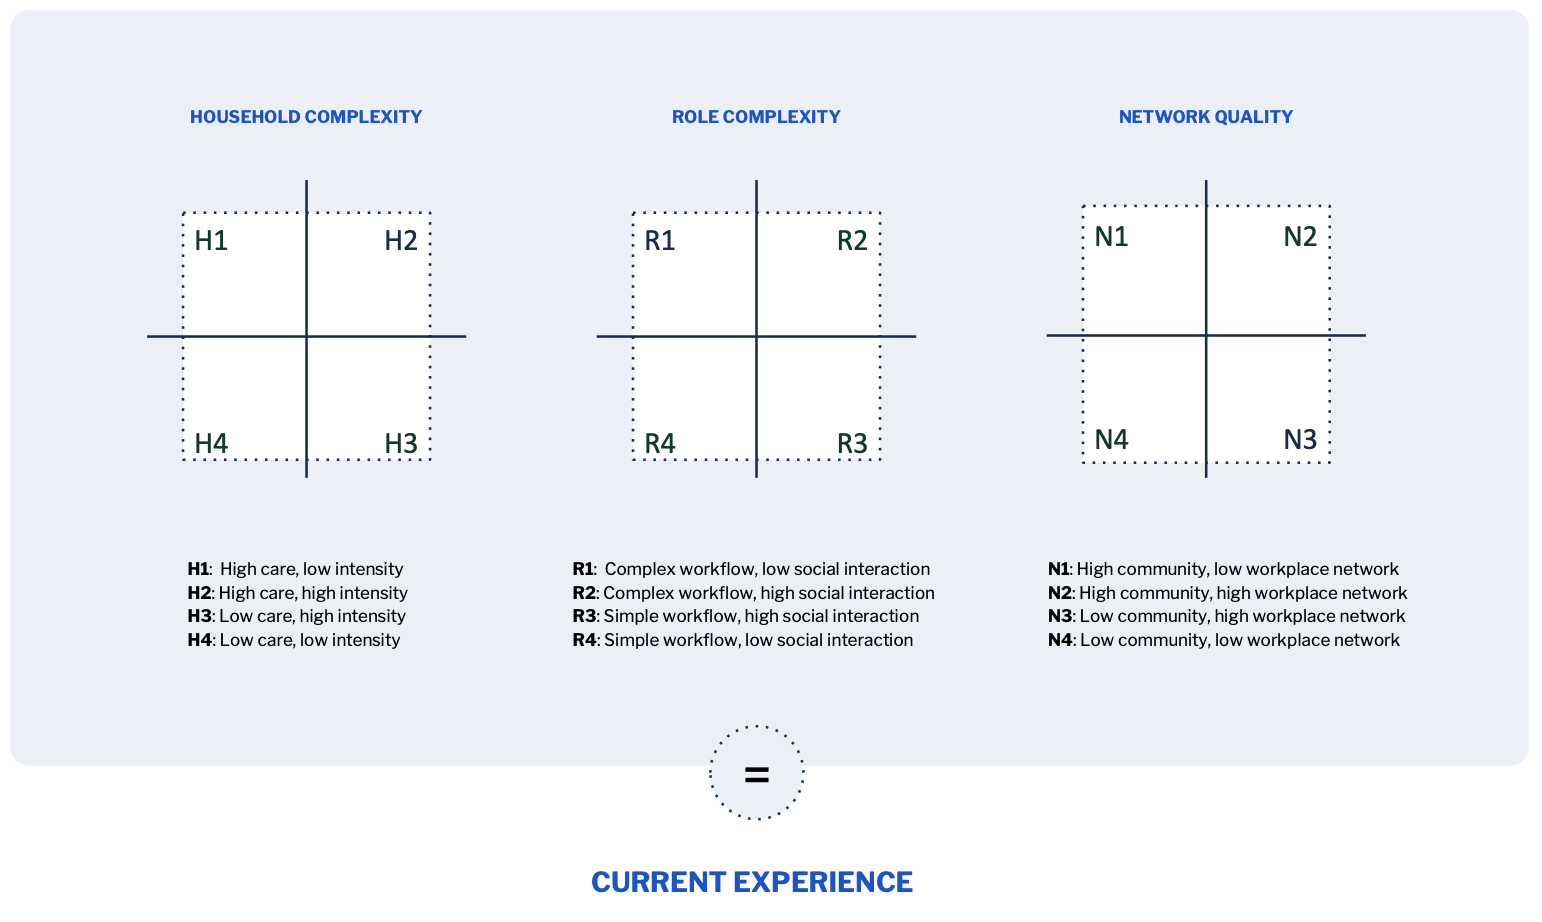 2-by-2 grids for visualizing levels of household complexity, role complexity, and network quality. 